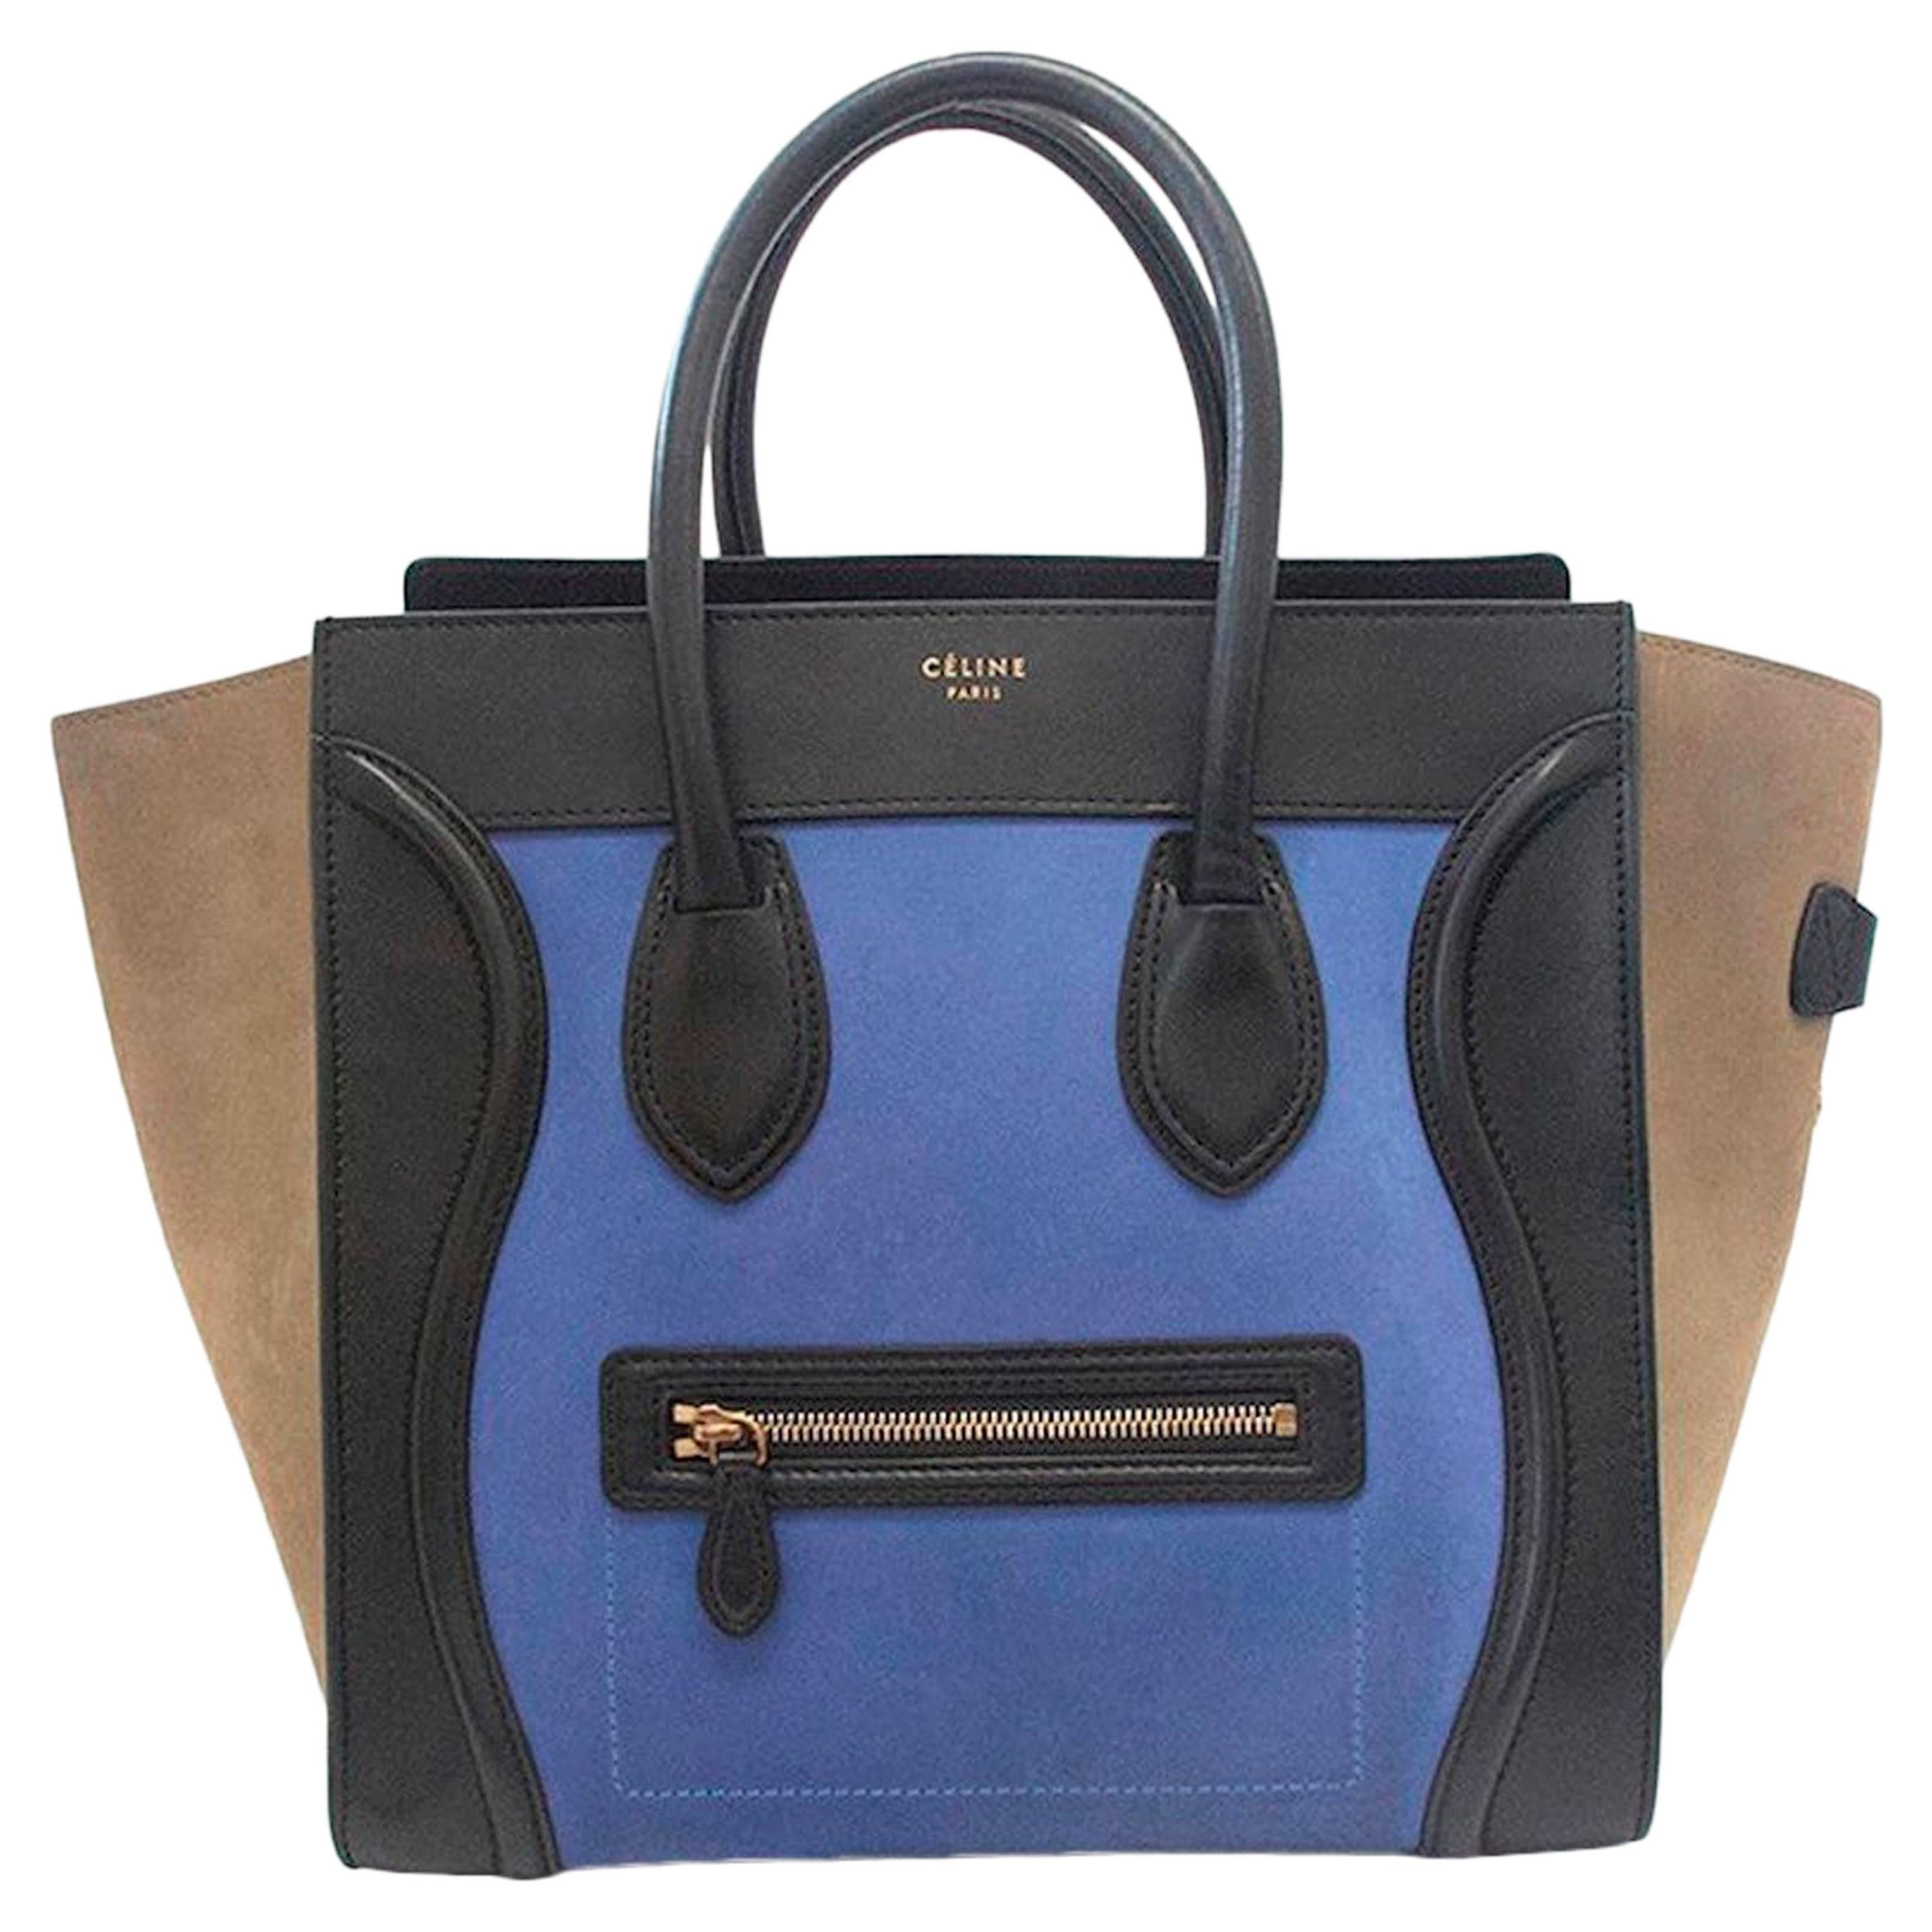 Celine suede colbat blue and taupe luggage tote